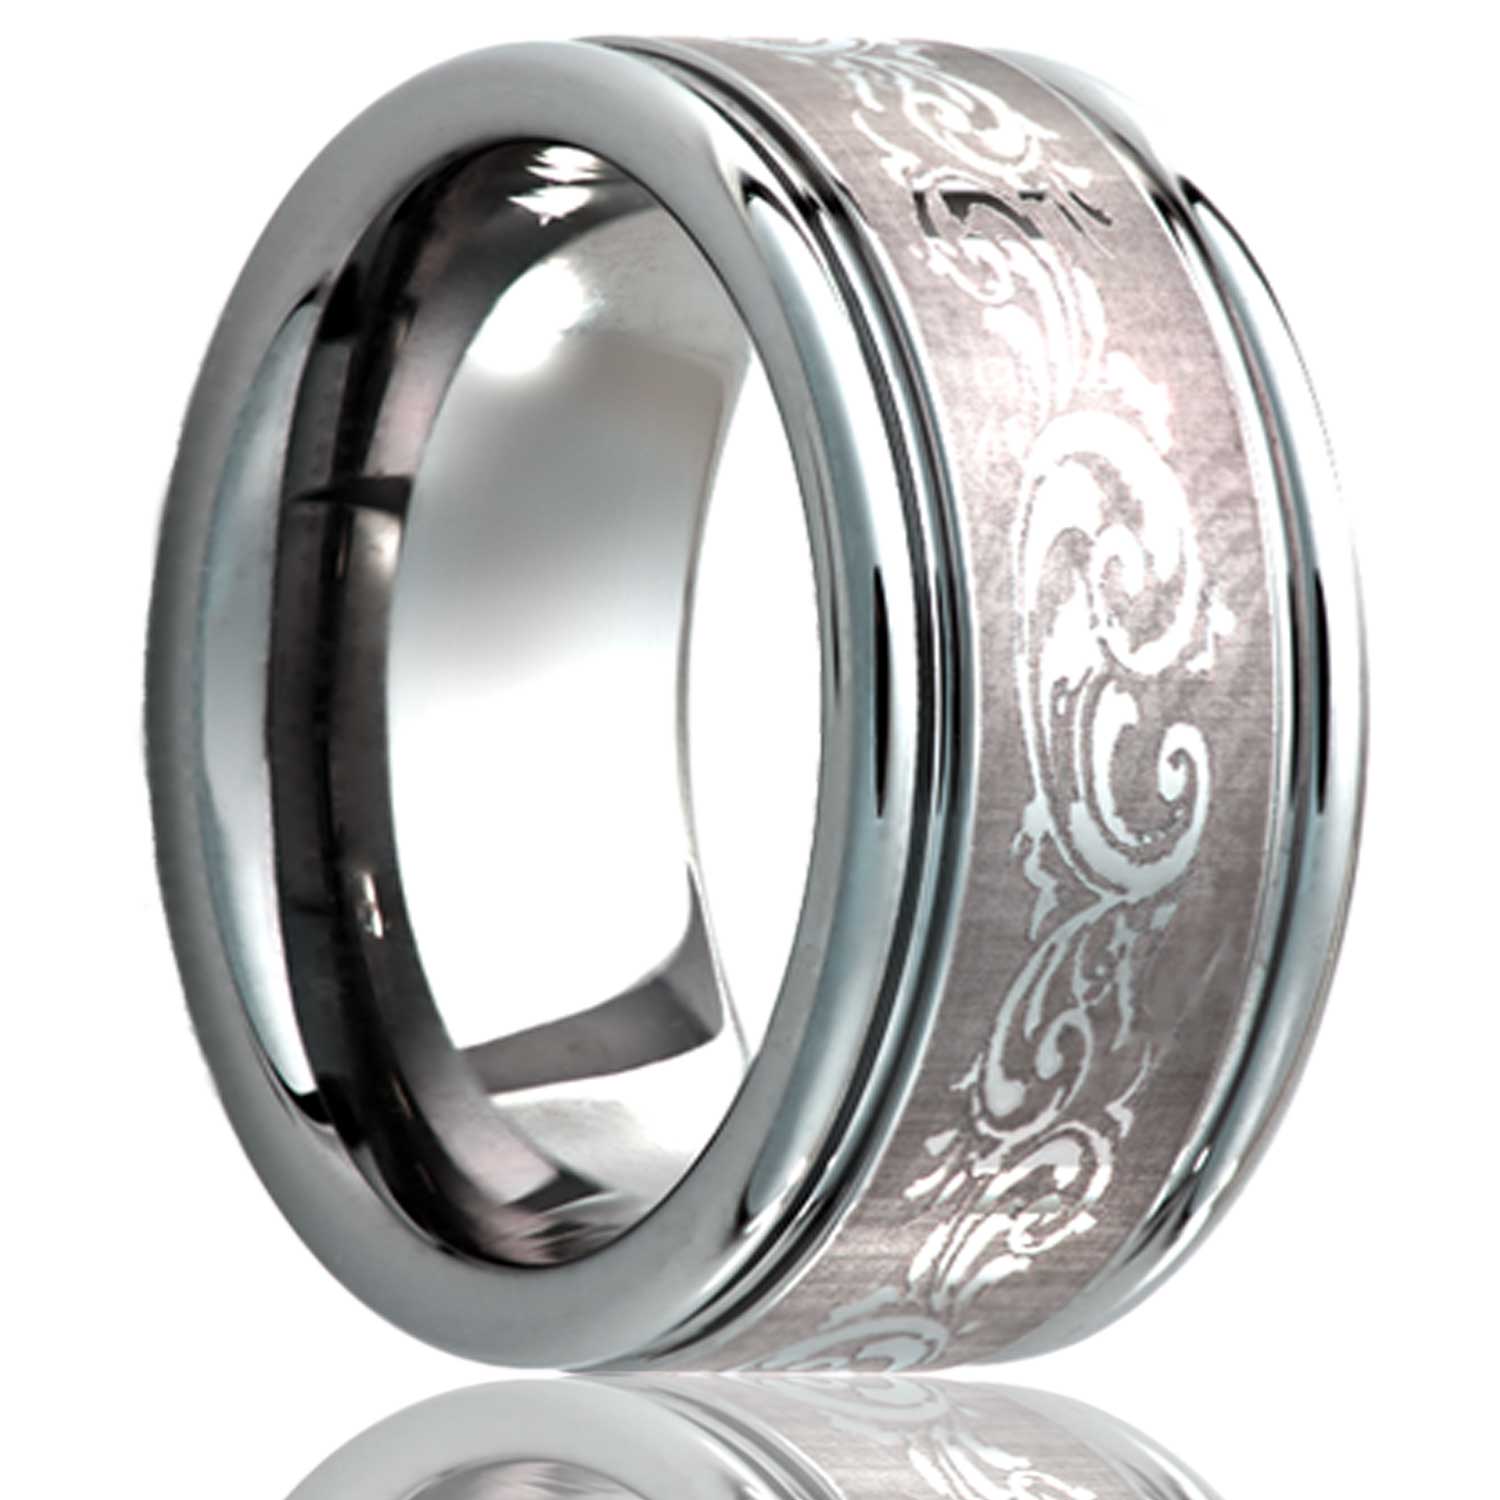 A swirl pattern grooved tungsten wedding band displayed on a neutral white background.